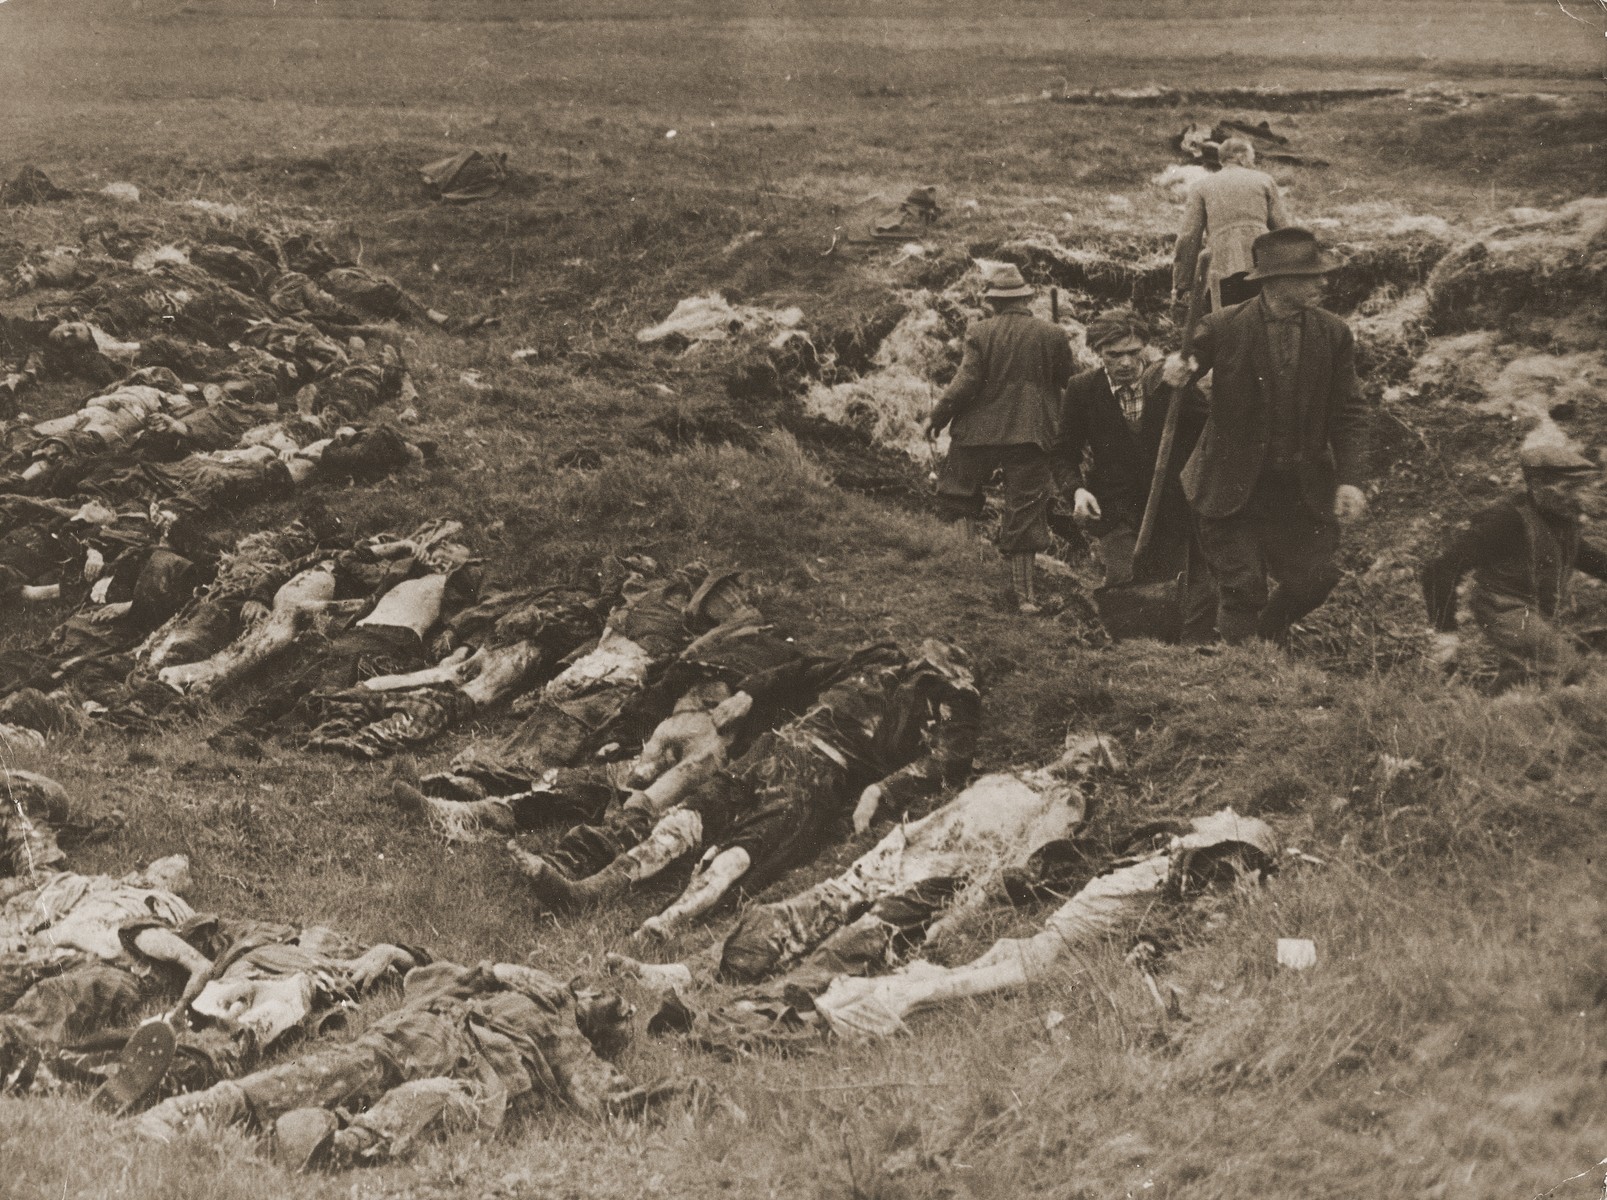 German civilians from Schwarzenfeld exhume the bodies of 140 Hungarian, Russian, and Polish Jews from a mass grave near the town.  

The victims died while on an evacuation transport from the Flossenbuerg concentration camp.